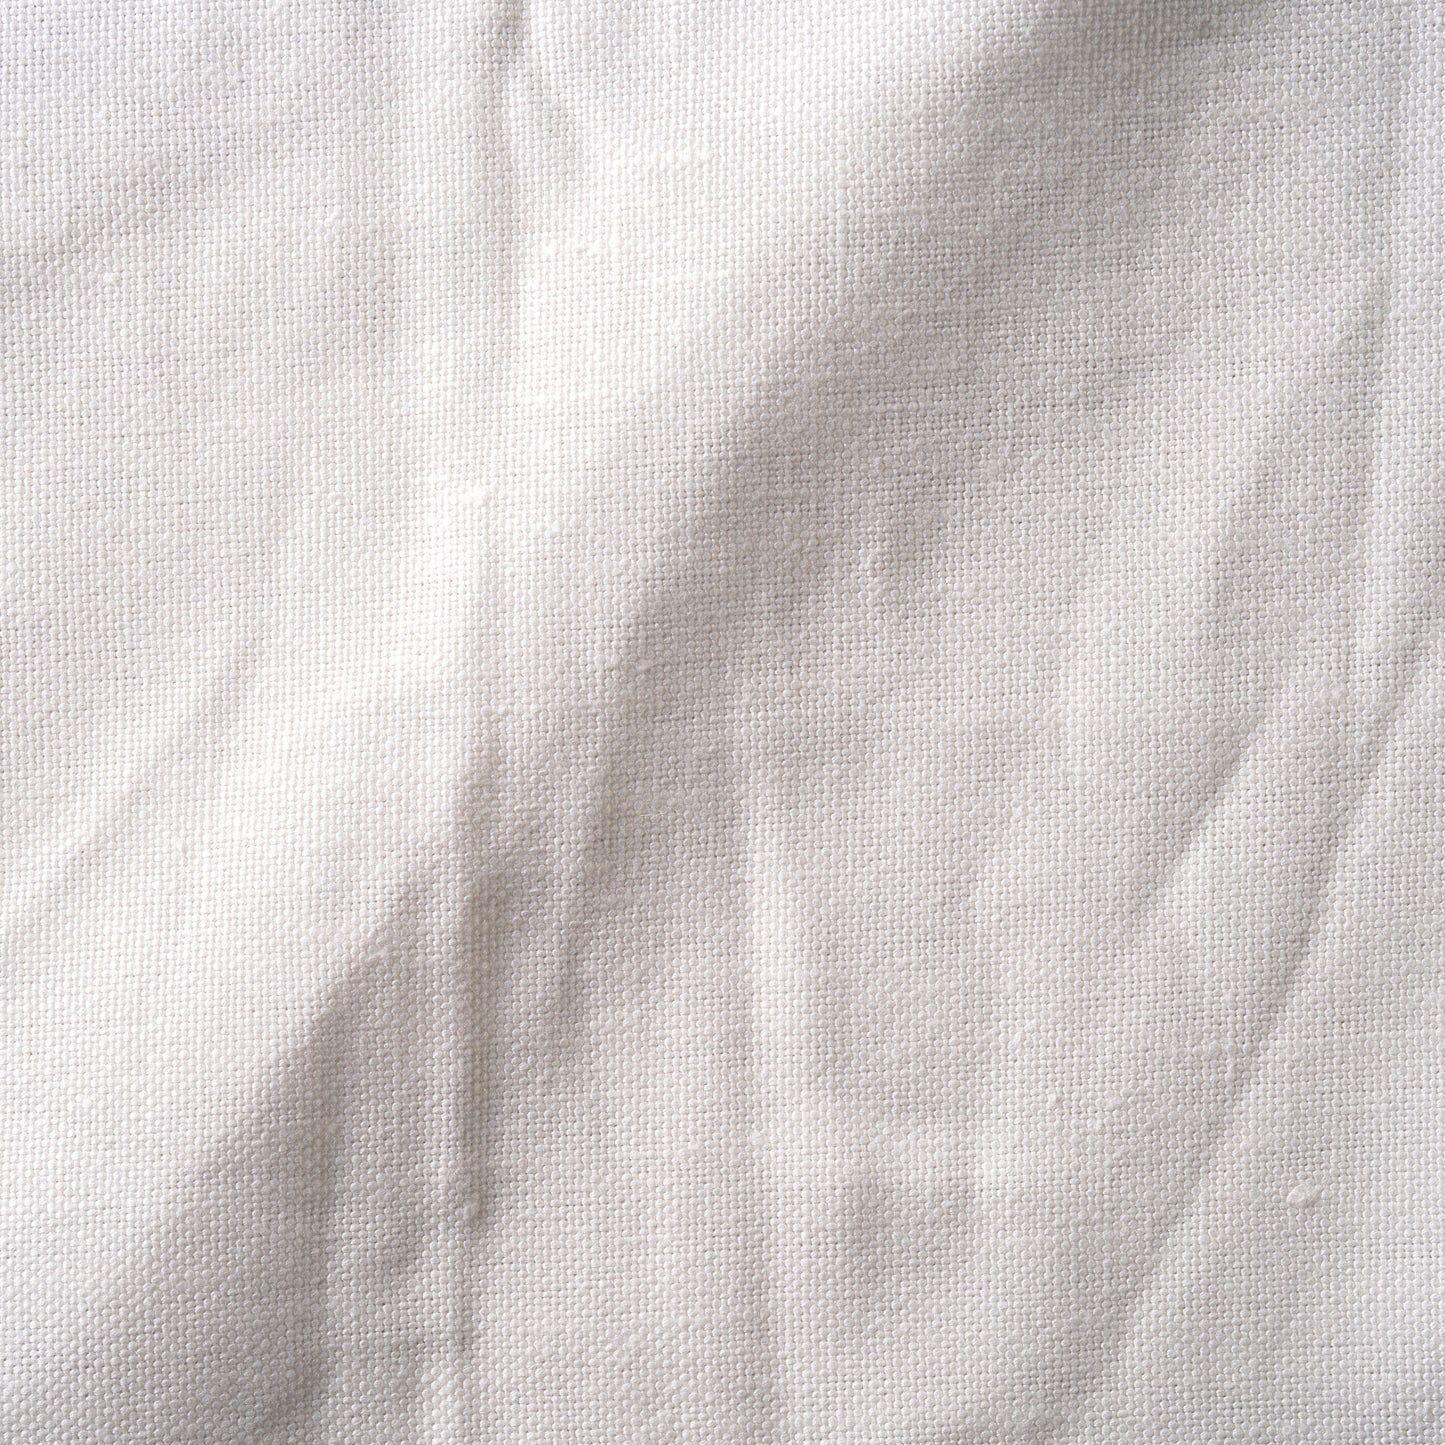 12 oz/sq yard 100% Upholstery/ Slipcover Weight Linen in Cream